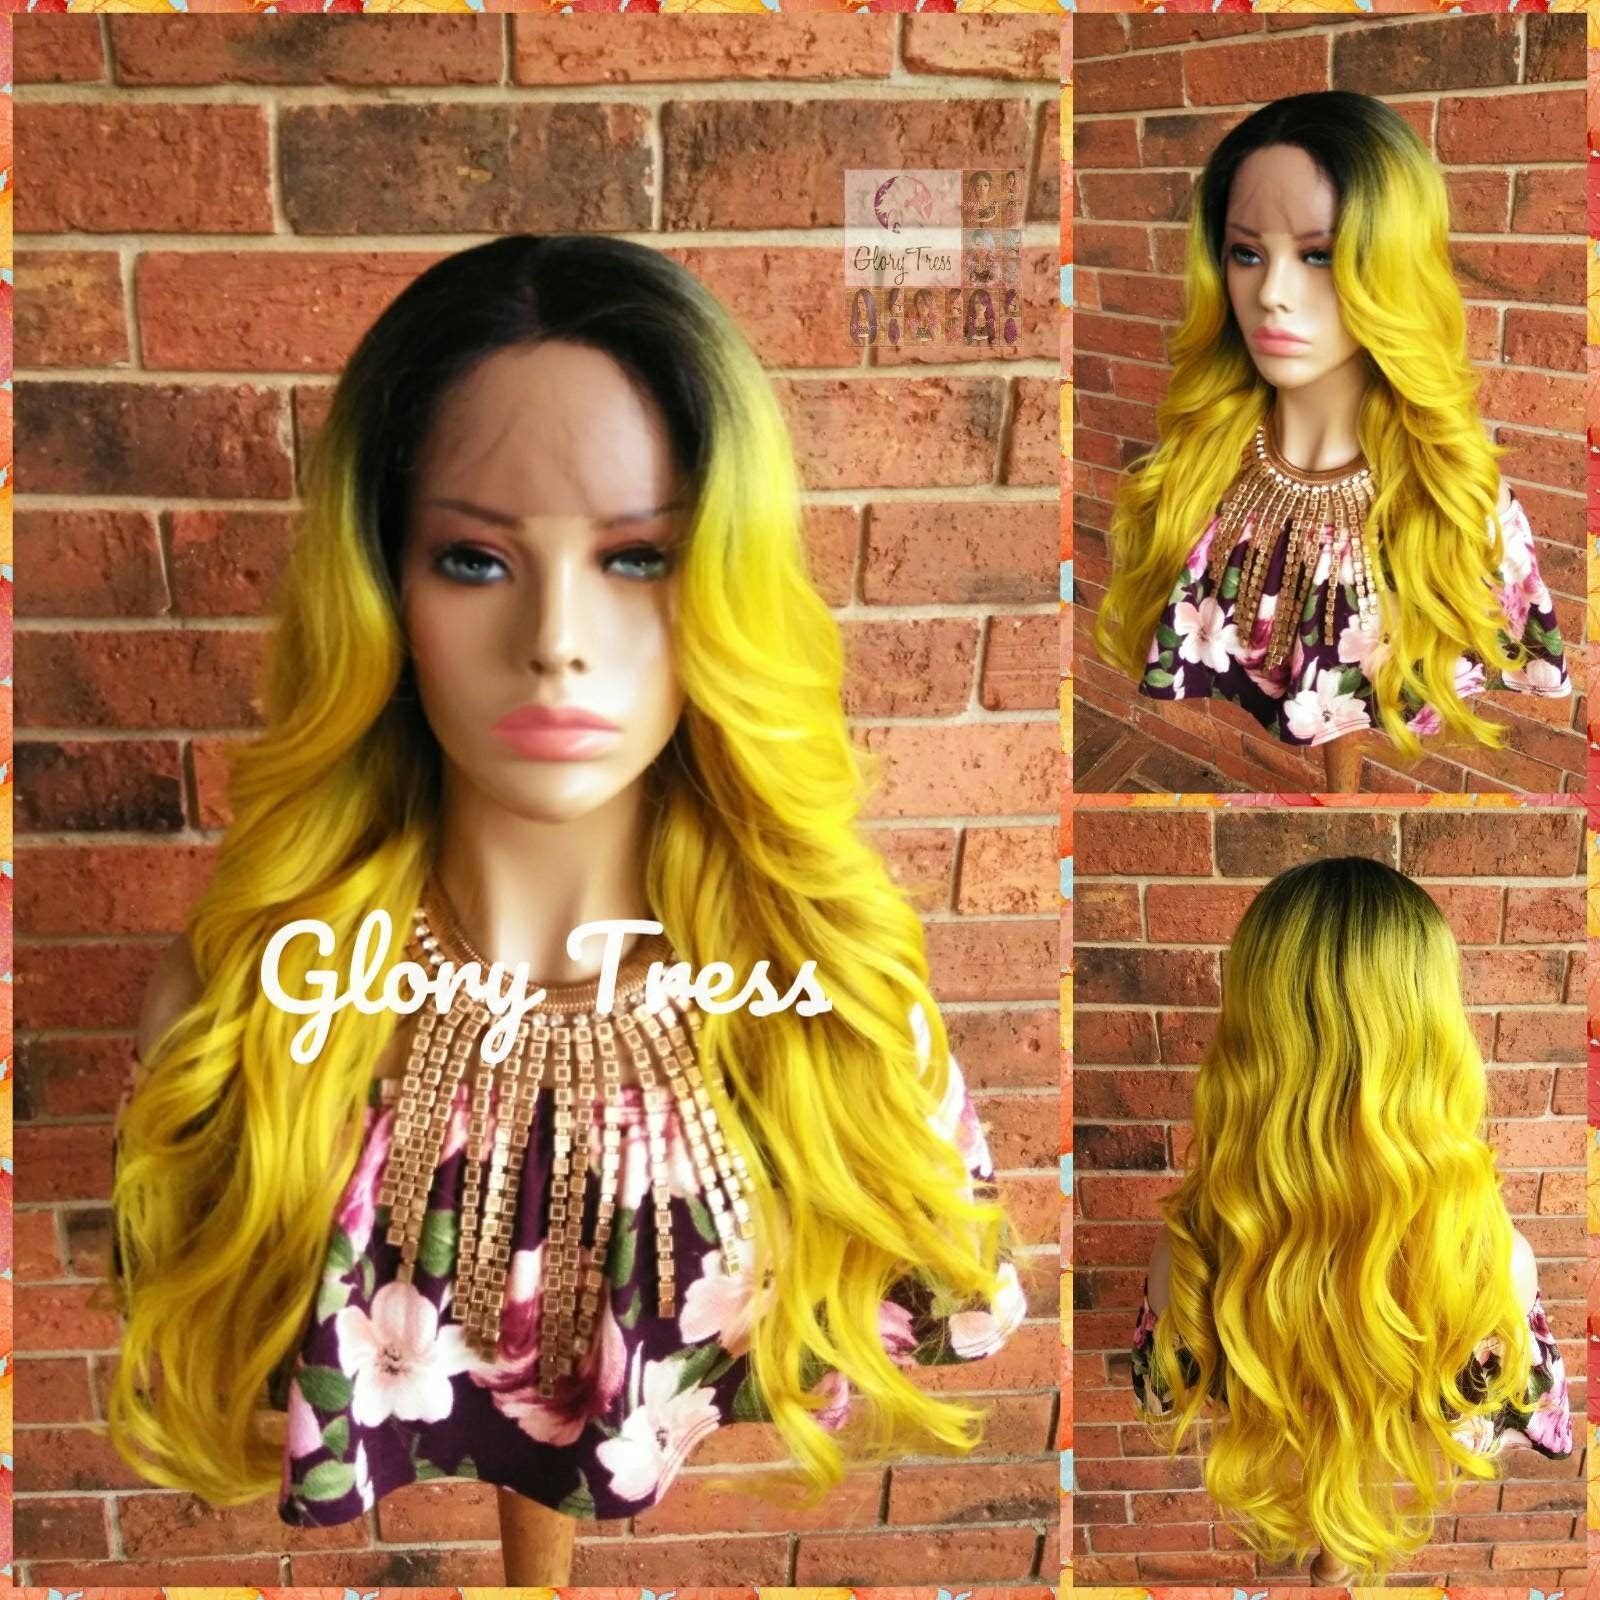 Lace Front Wig, Wavy Lace Front Wig, Wigs, Ombre Wig, Wig, Ombre Yellow Wig, Glory Tress, Cosplay Wig, Heat Resistant Wig, CLEARANCE / SUNNY